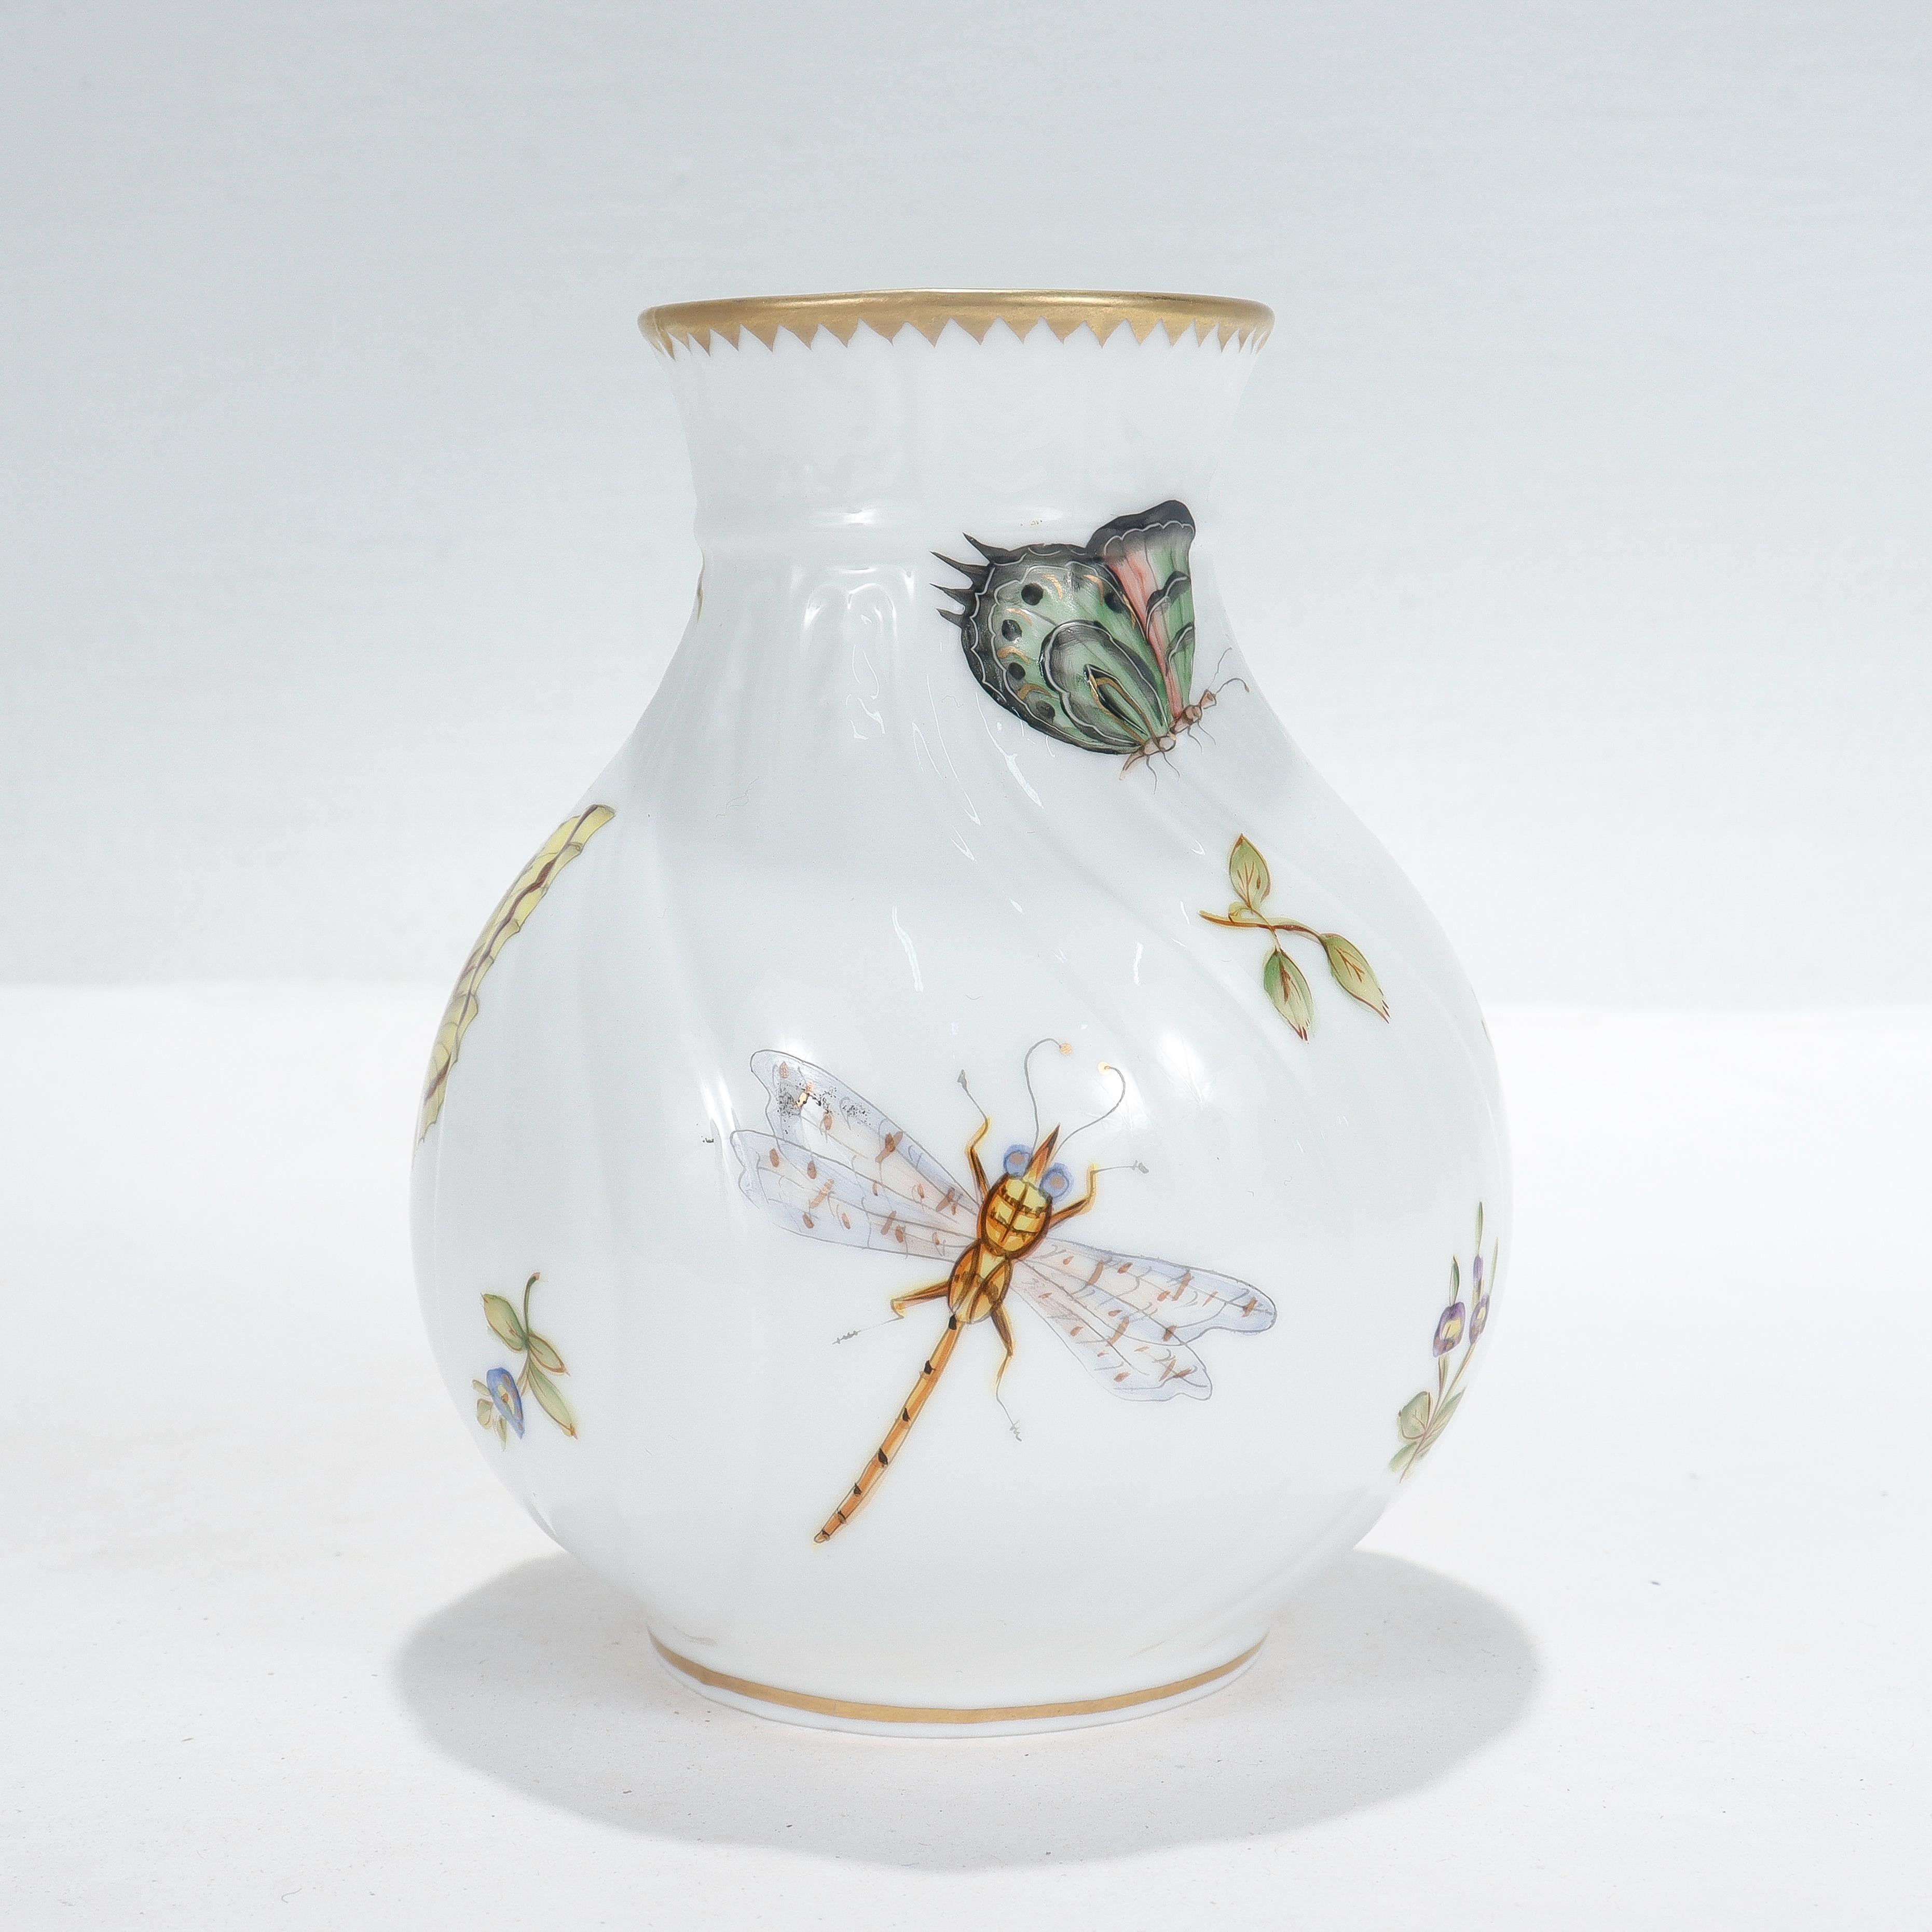 Hungarian Anna Weatherley Handpainted Budapest Spring Butterfly & Dragonfly Porcelain Vase